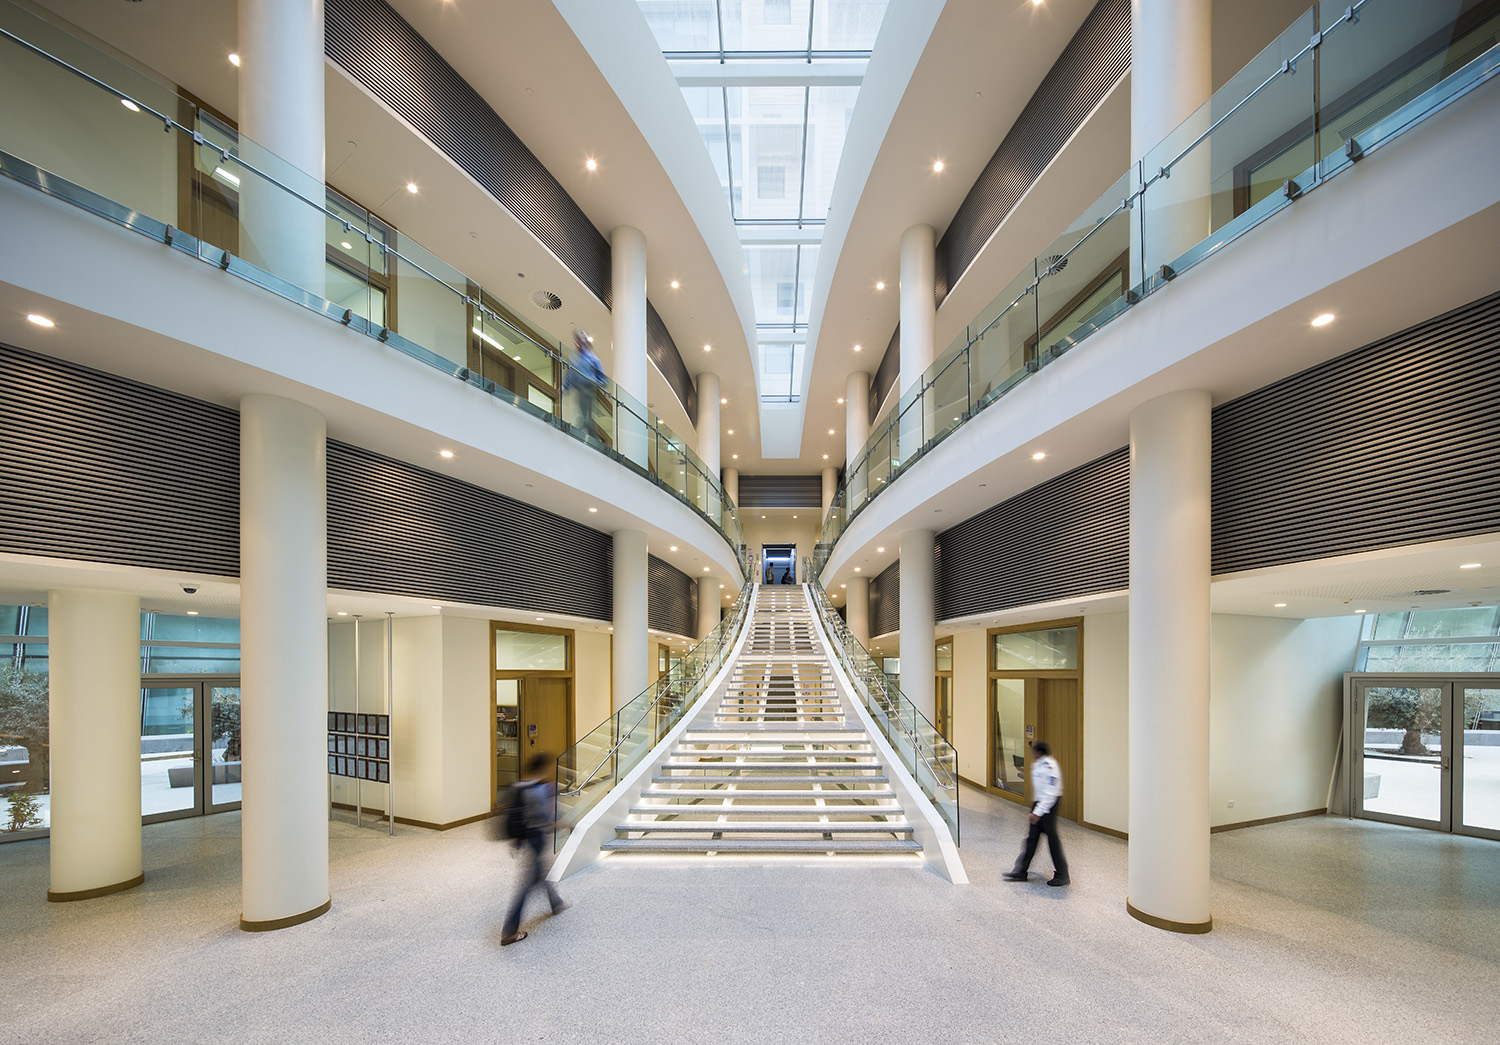 The Experimental Research Building is a two-story structure organised around two courtyards flanking a central stair. A skylight above the stair floods the double-height lobby with light. Offices face the courtyards, which are visible to the left and right from the moment of entry  